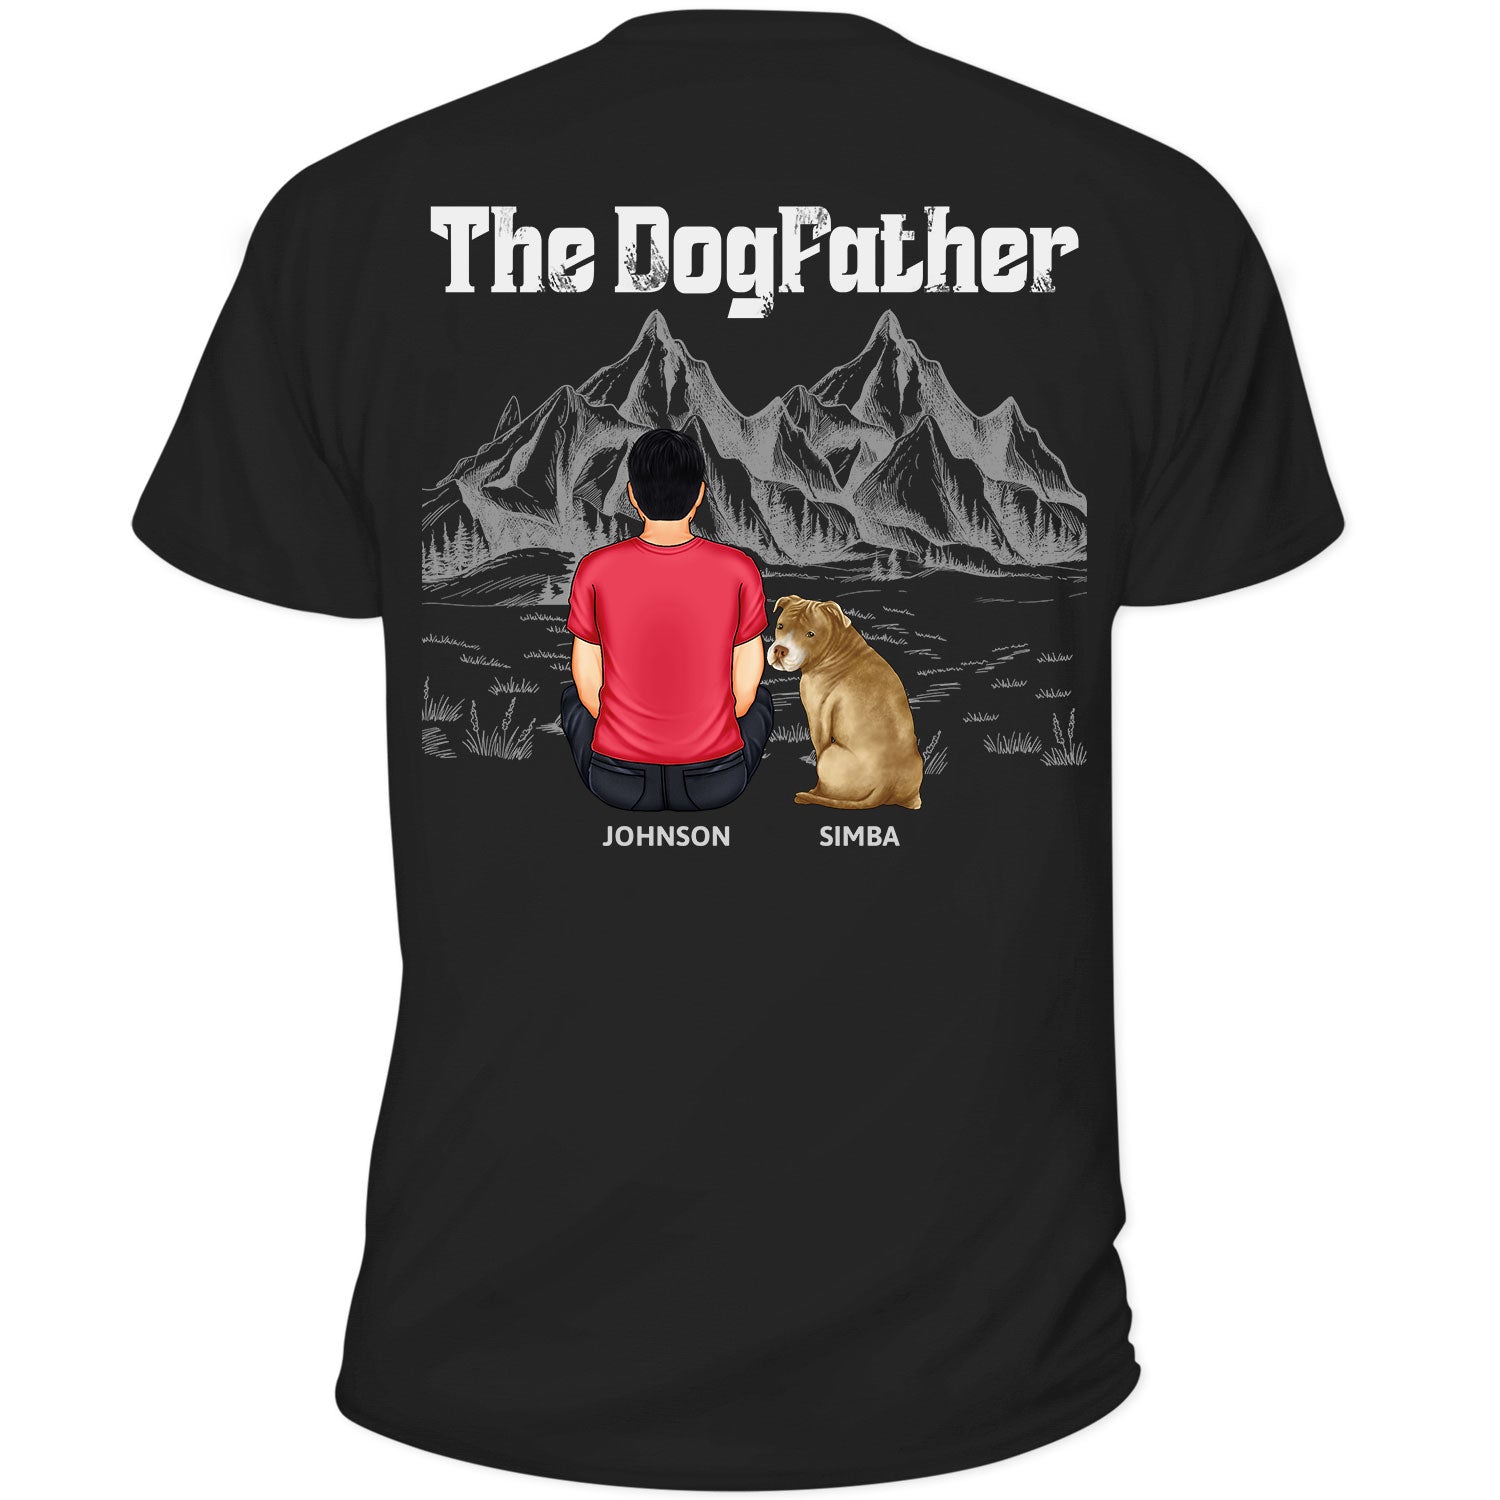 The Dog Father - Birthday, Loving Gift For Dog Dad, Dog Lovers - Personalized T Shirt